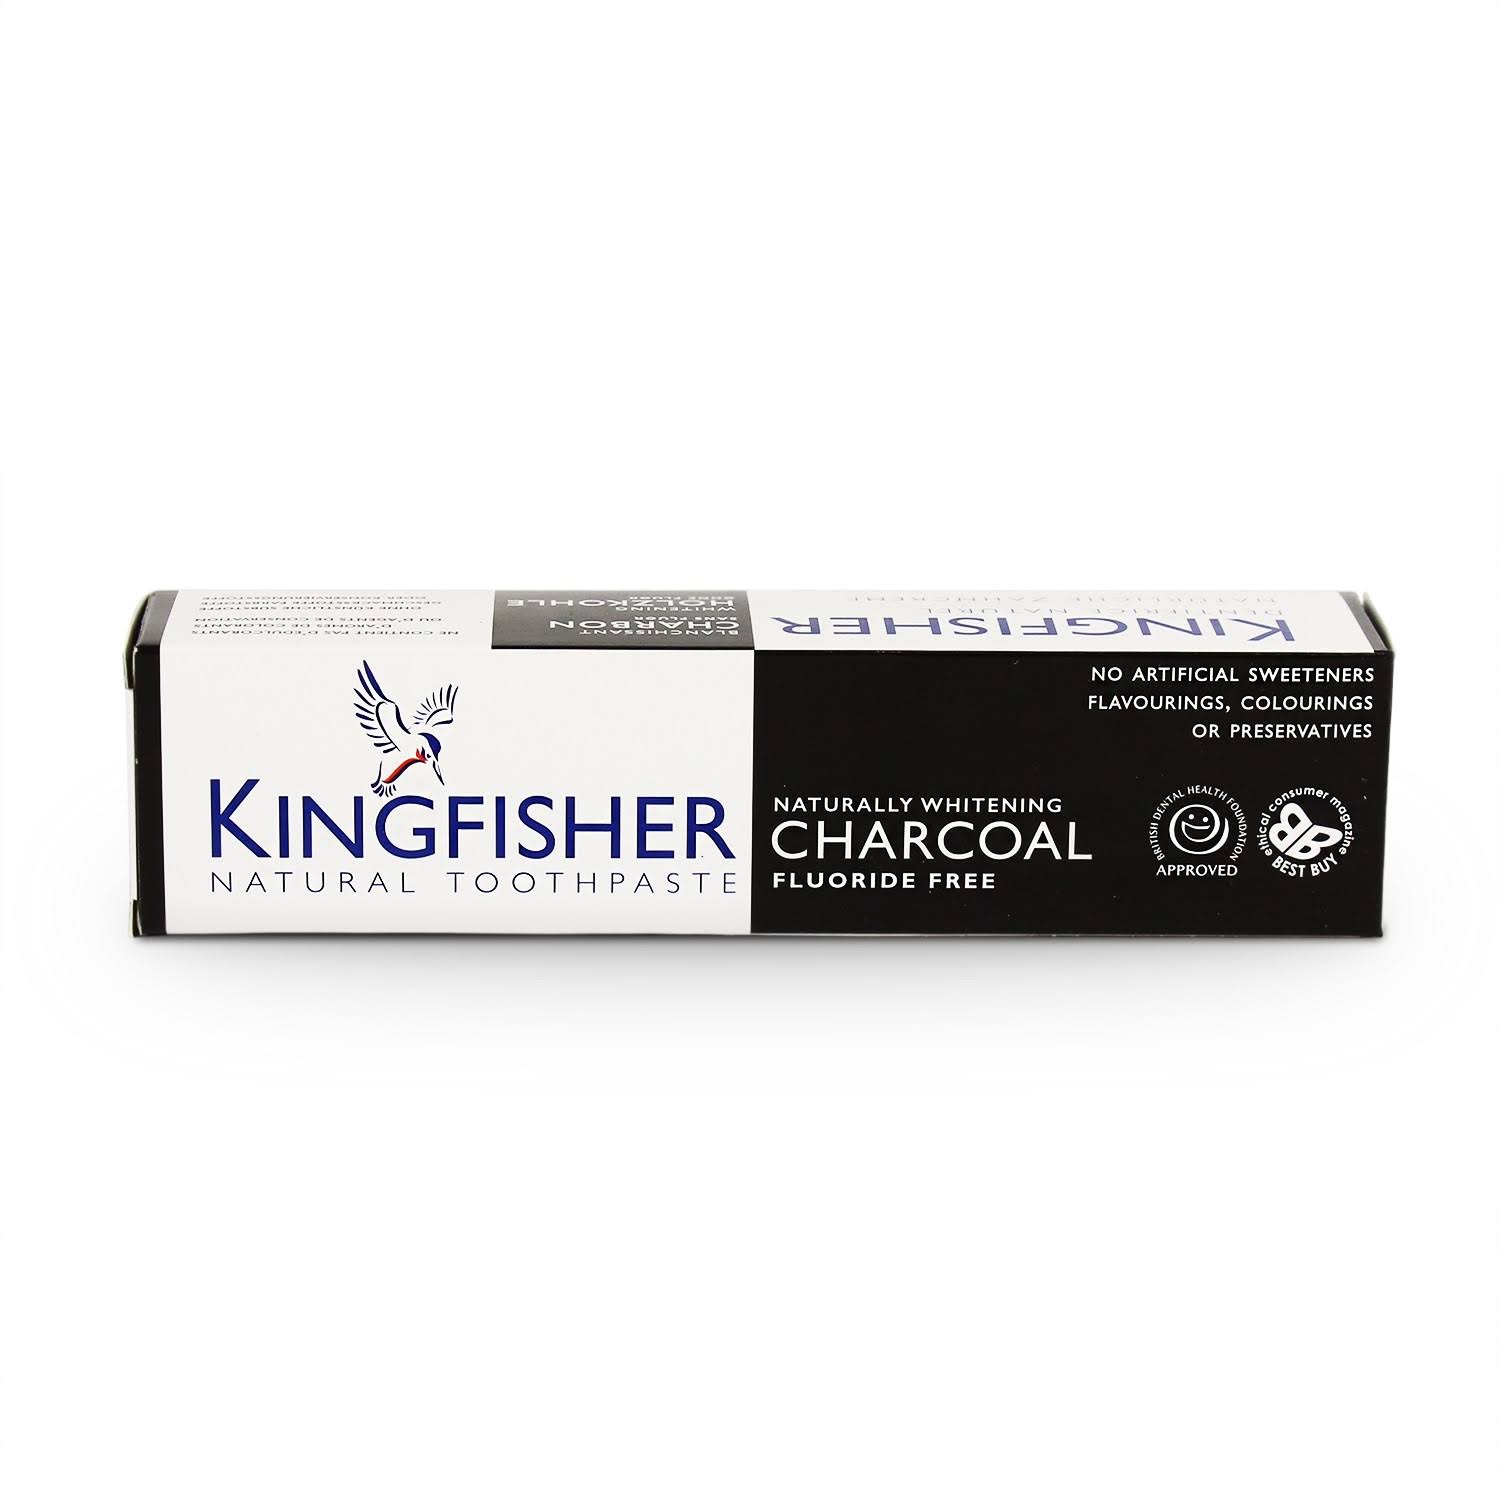 Kingfisher Naturally Whitening Charcoal Toothpaste, 100 ml